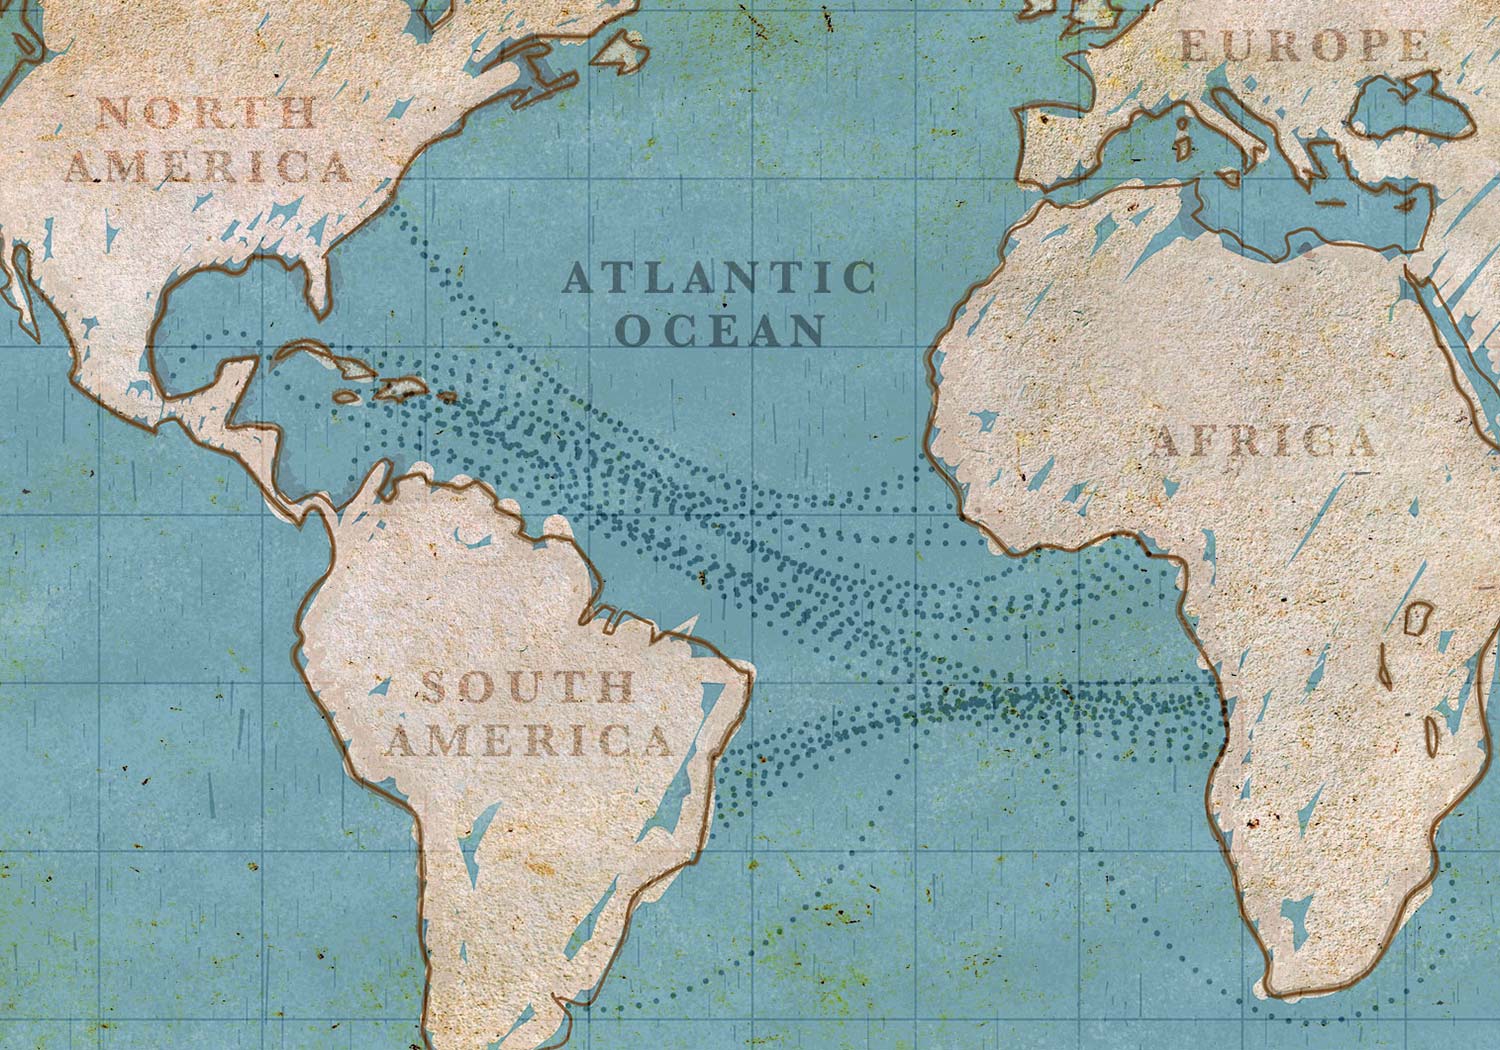 A map with dotted lines representing the routes of slave ships illustrates the Transatlantic Slave Trade.